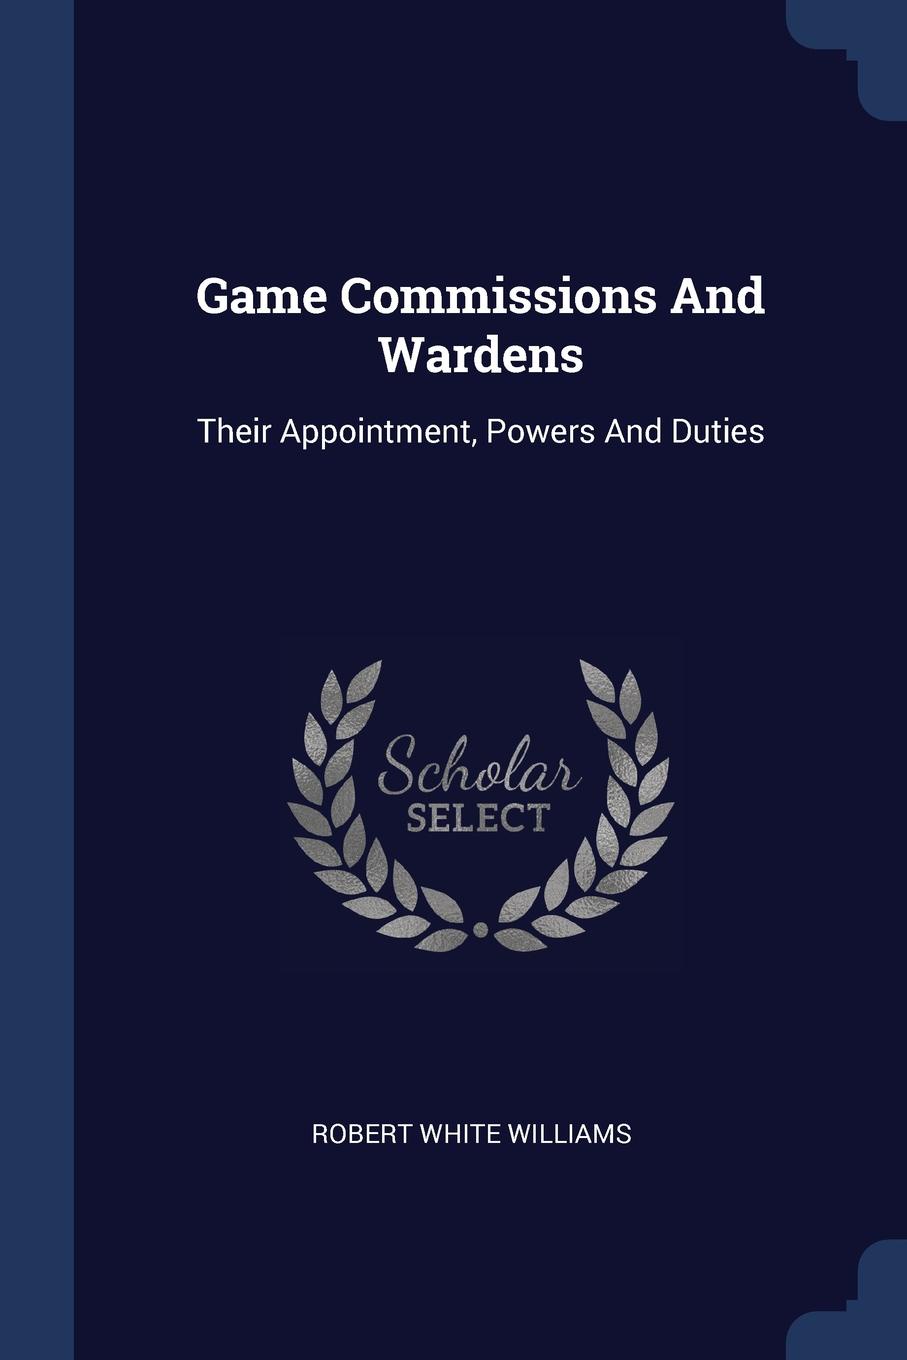 Game Commissions And Wardens. Their Appointment, Powers And Duties